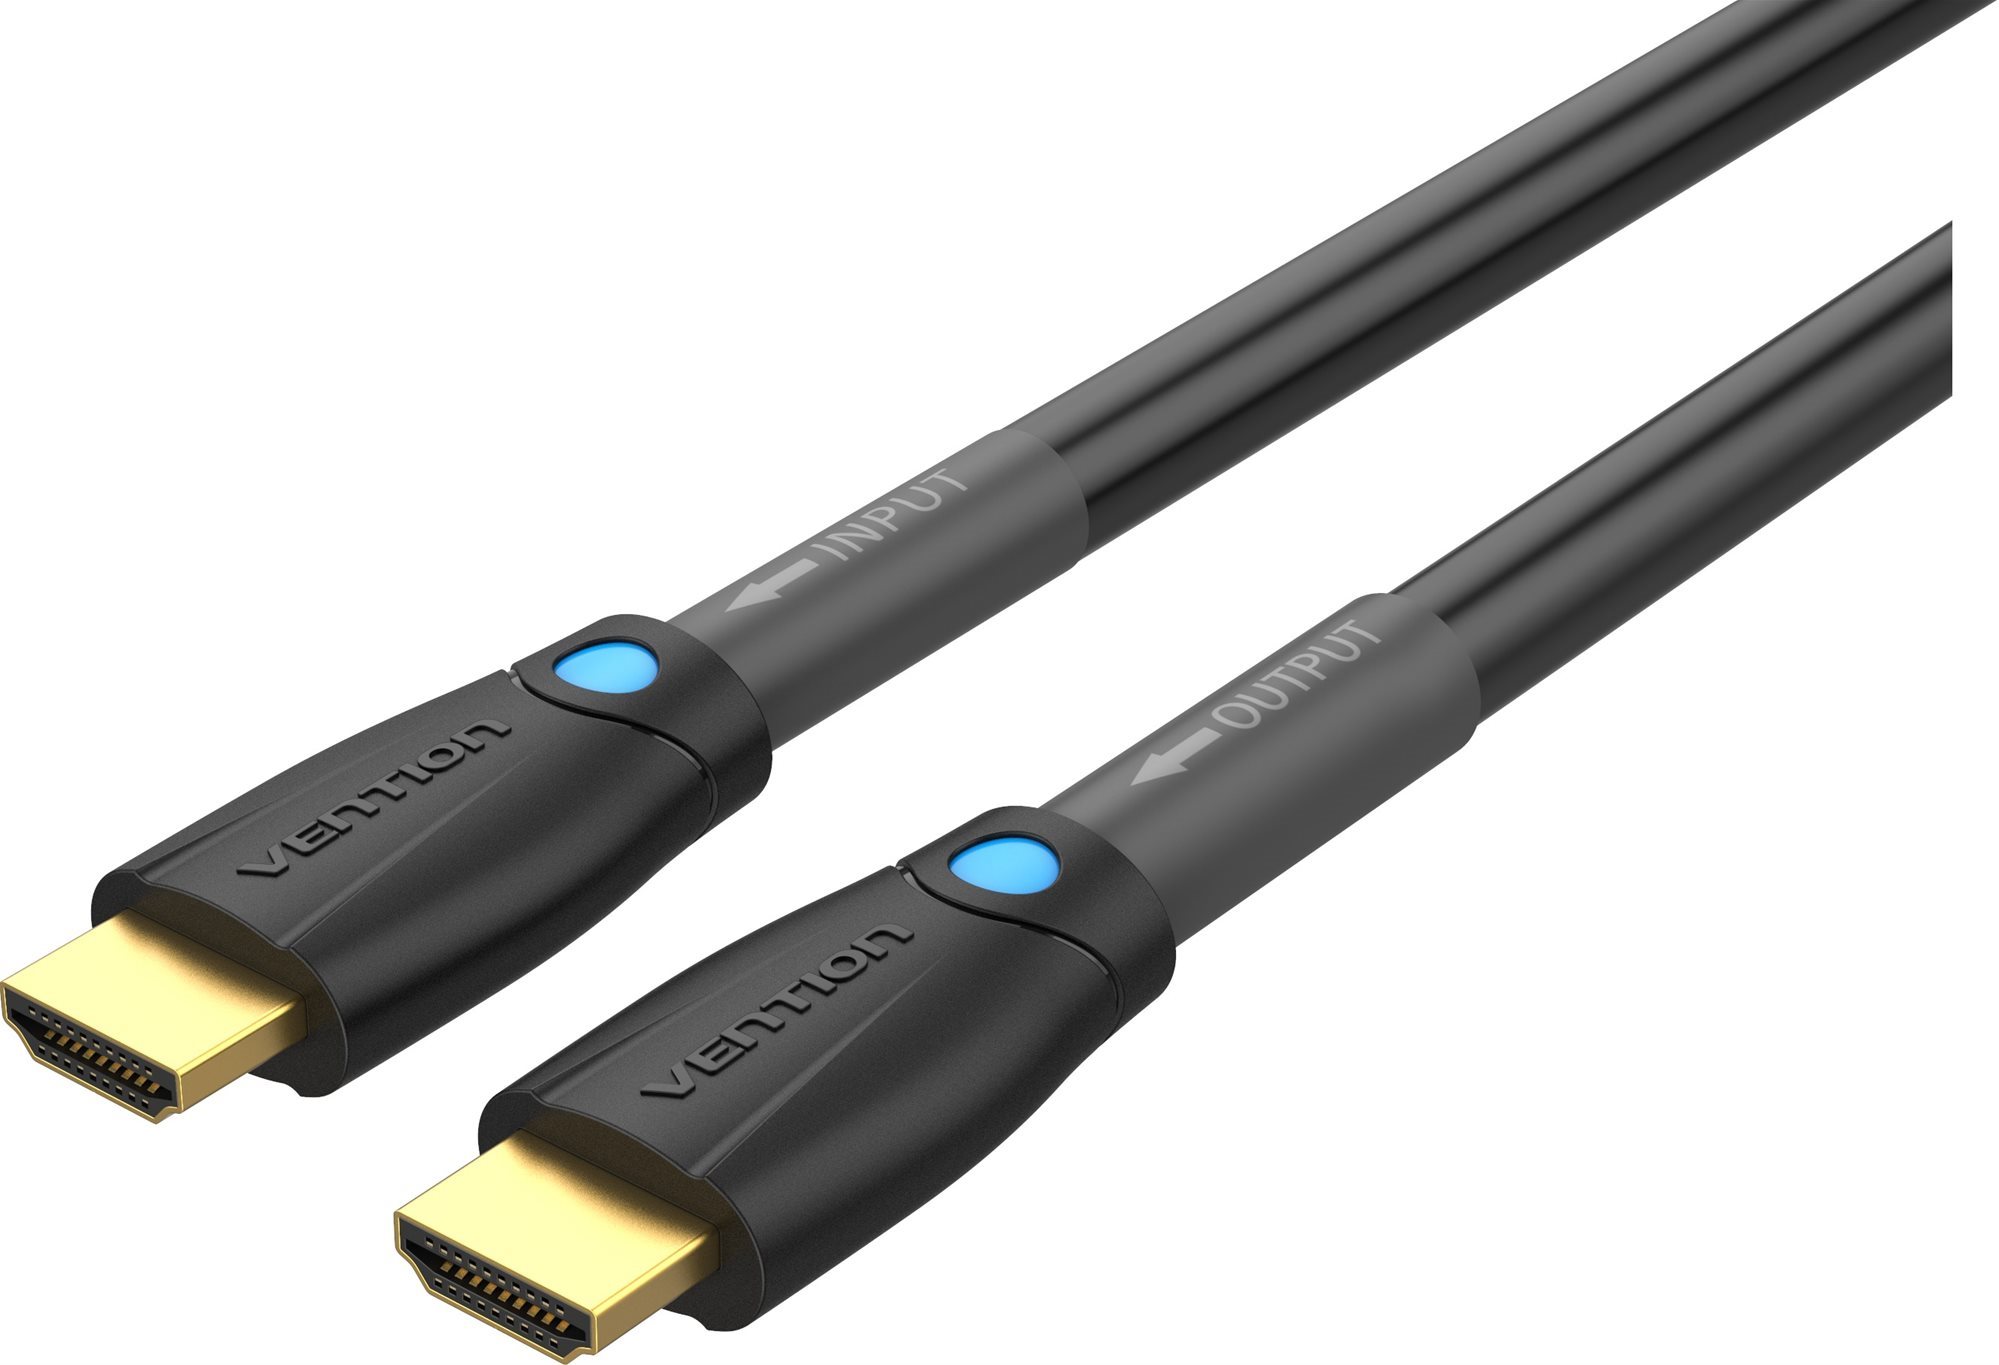 Vention HDMI Cable 30M Black for Engineering